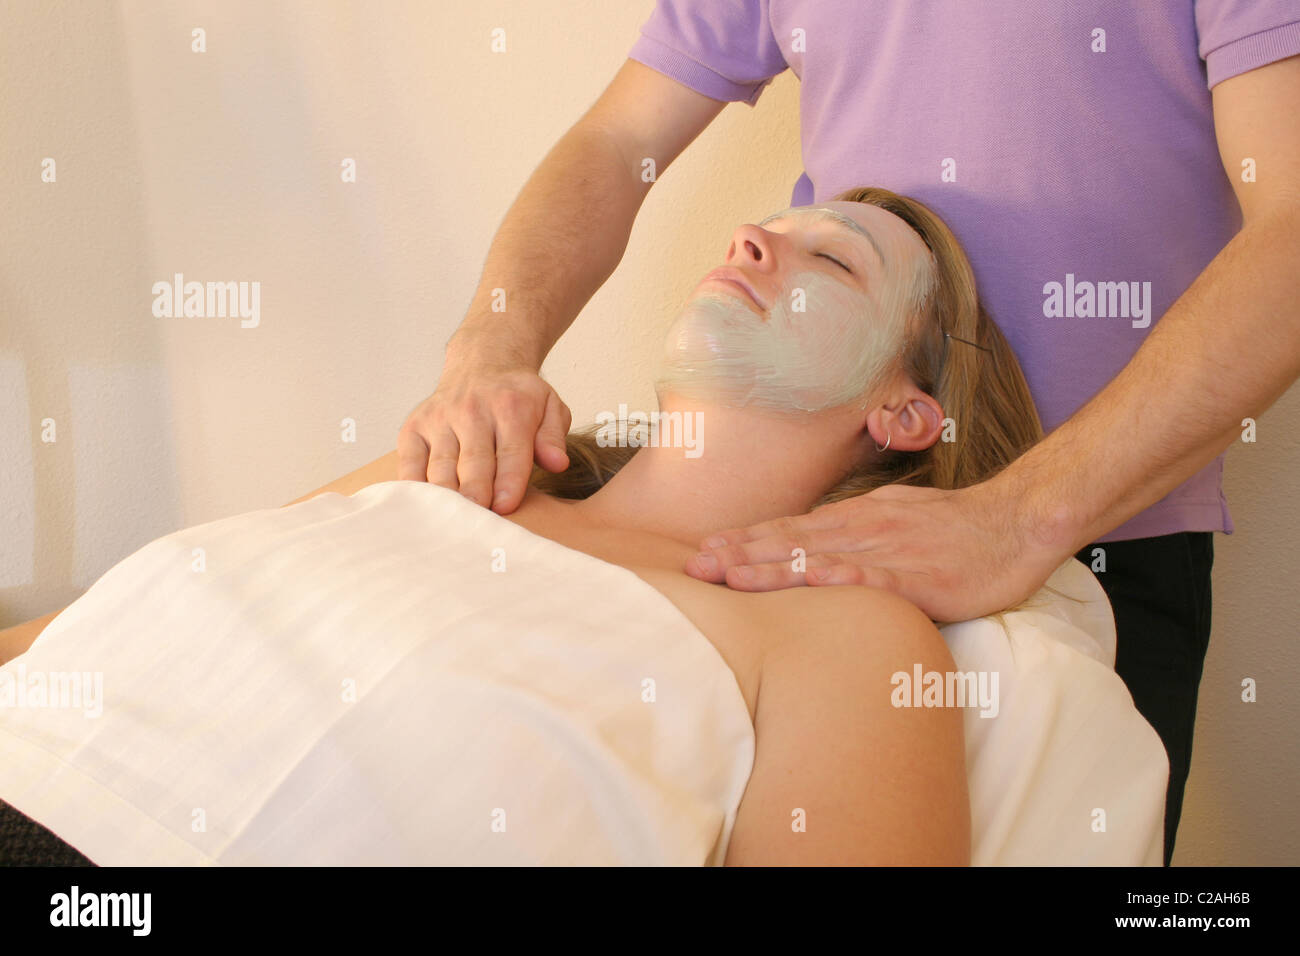 Released health spa woman receives organic facial Stock Photo